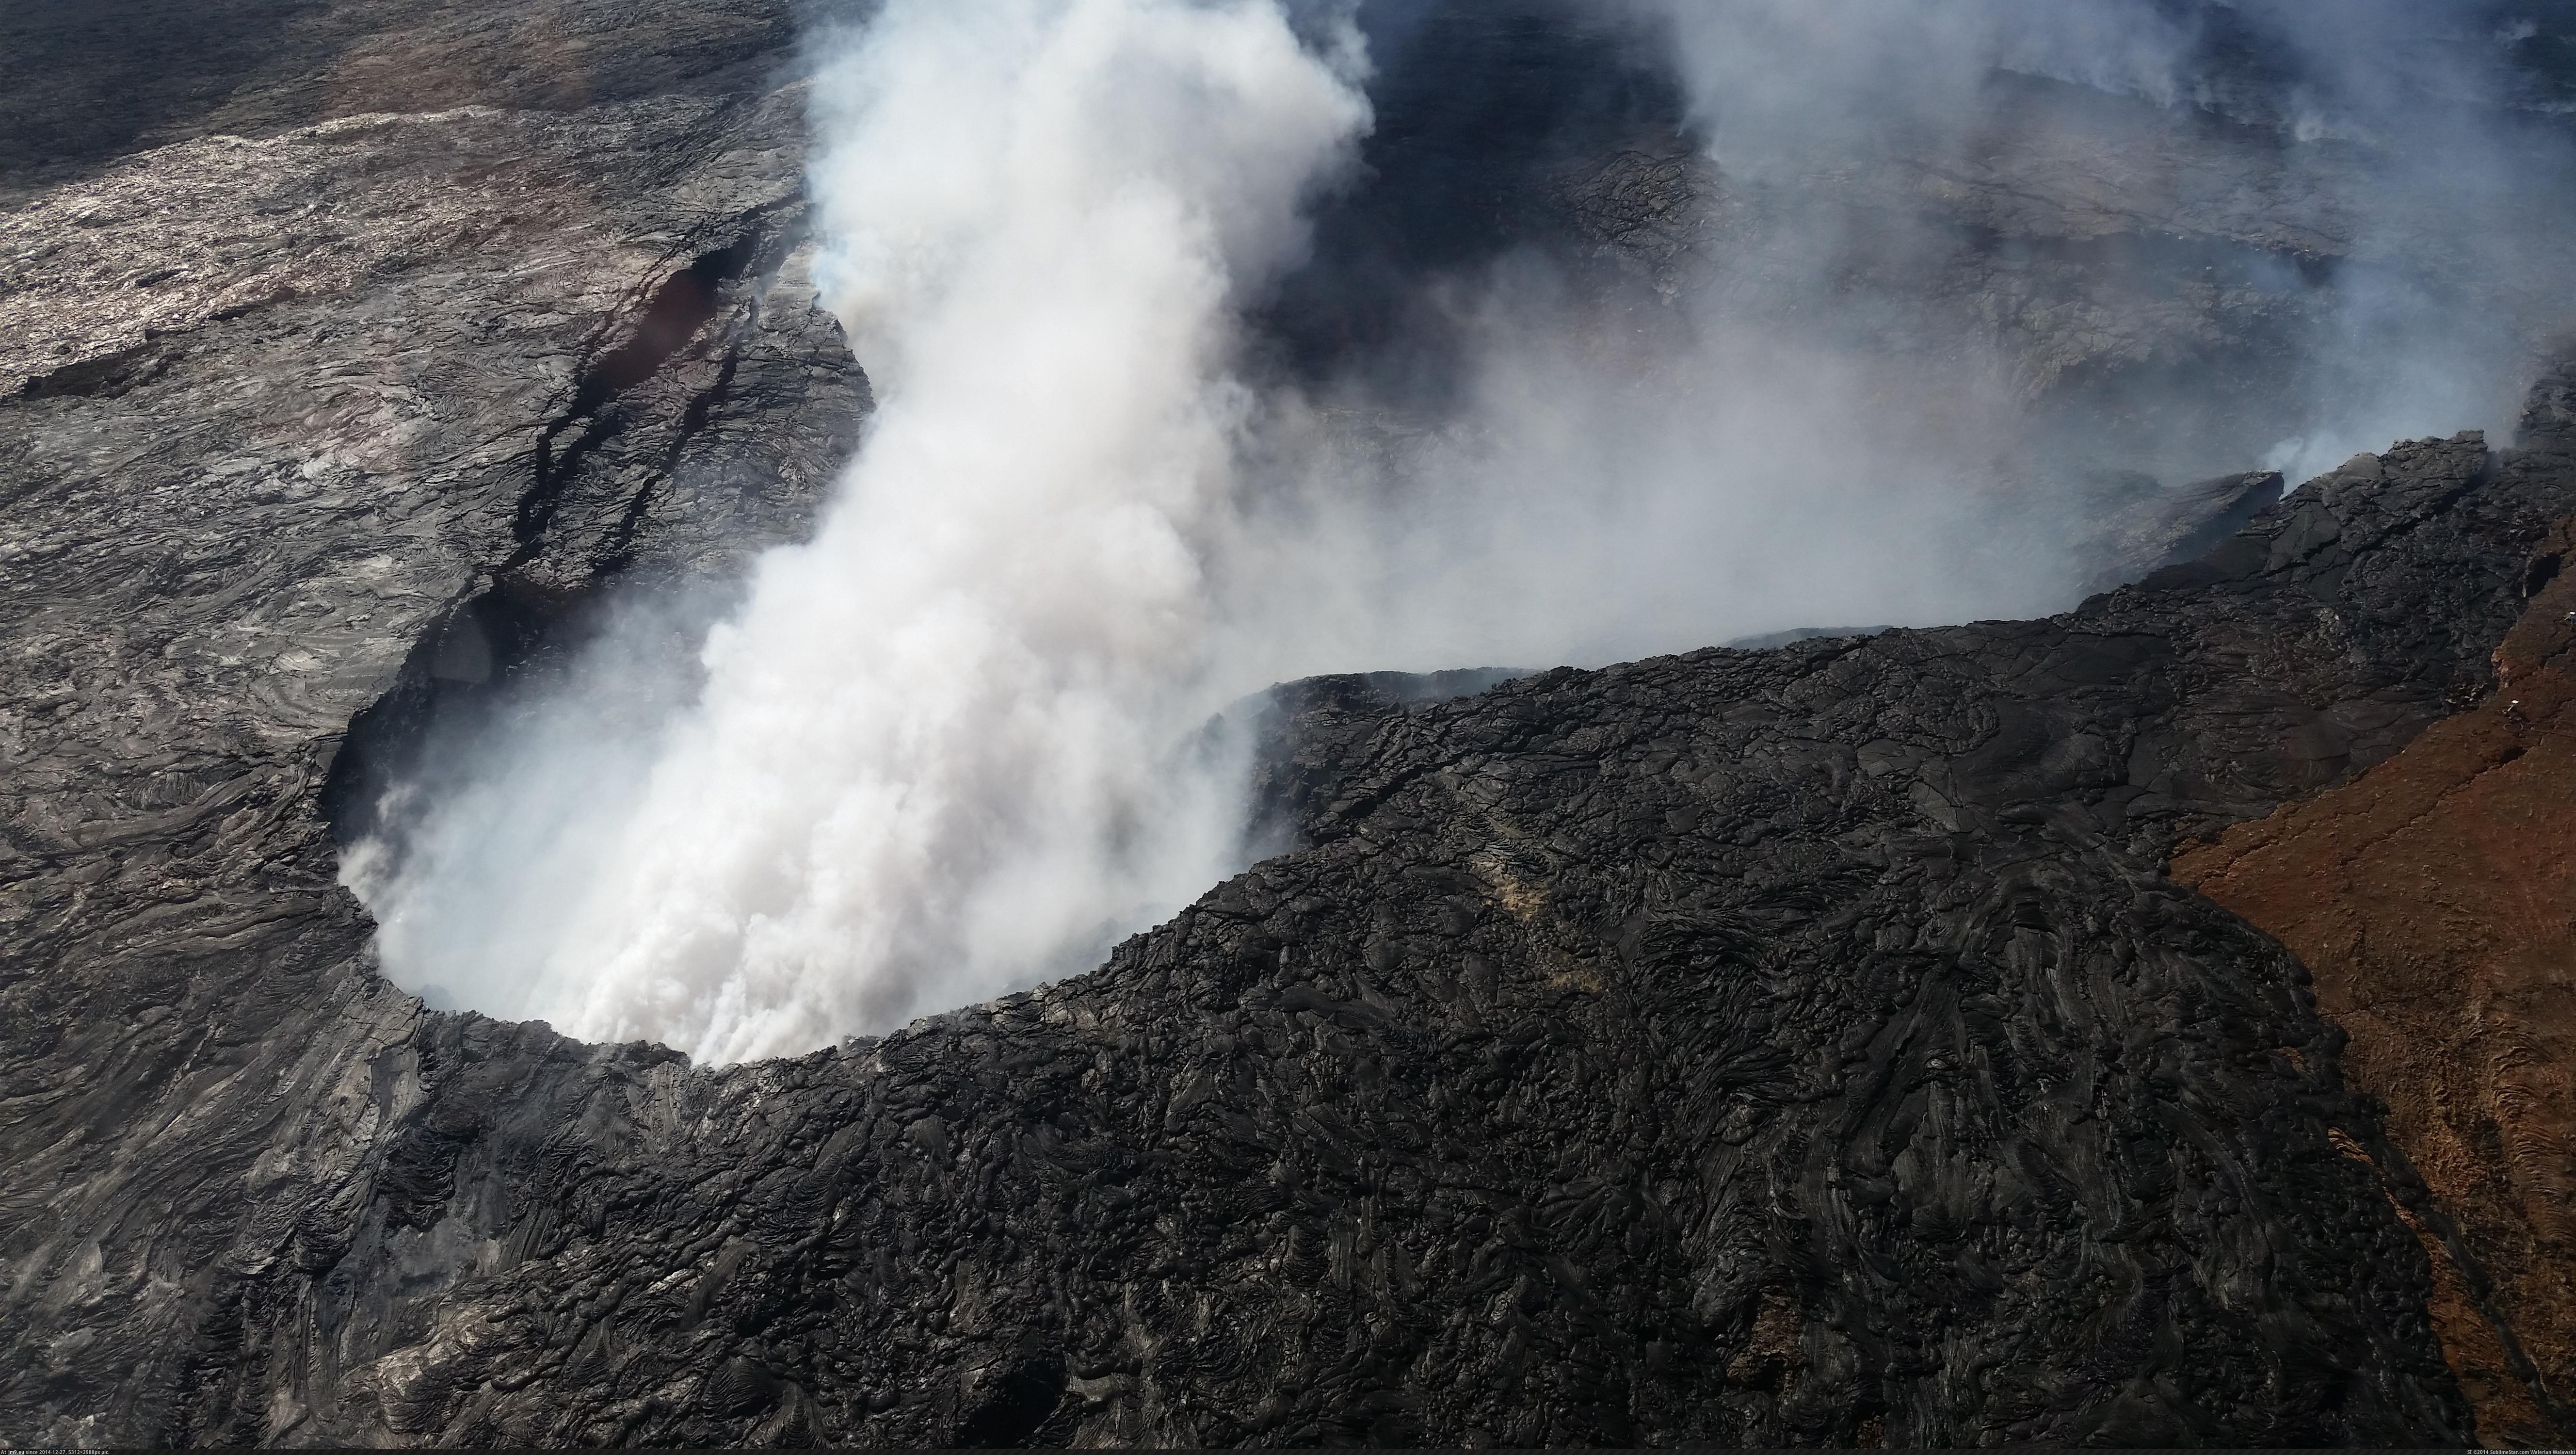 [Earthporn] Kilauea volcano in Big Island, Hawaii, from a helicopter tour, by endarterectomist [OC] [5312x2988] (in My r/EARTHPORN favs)